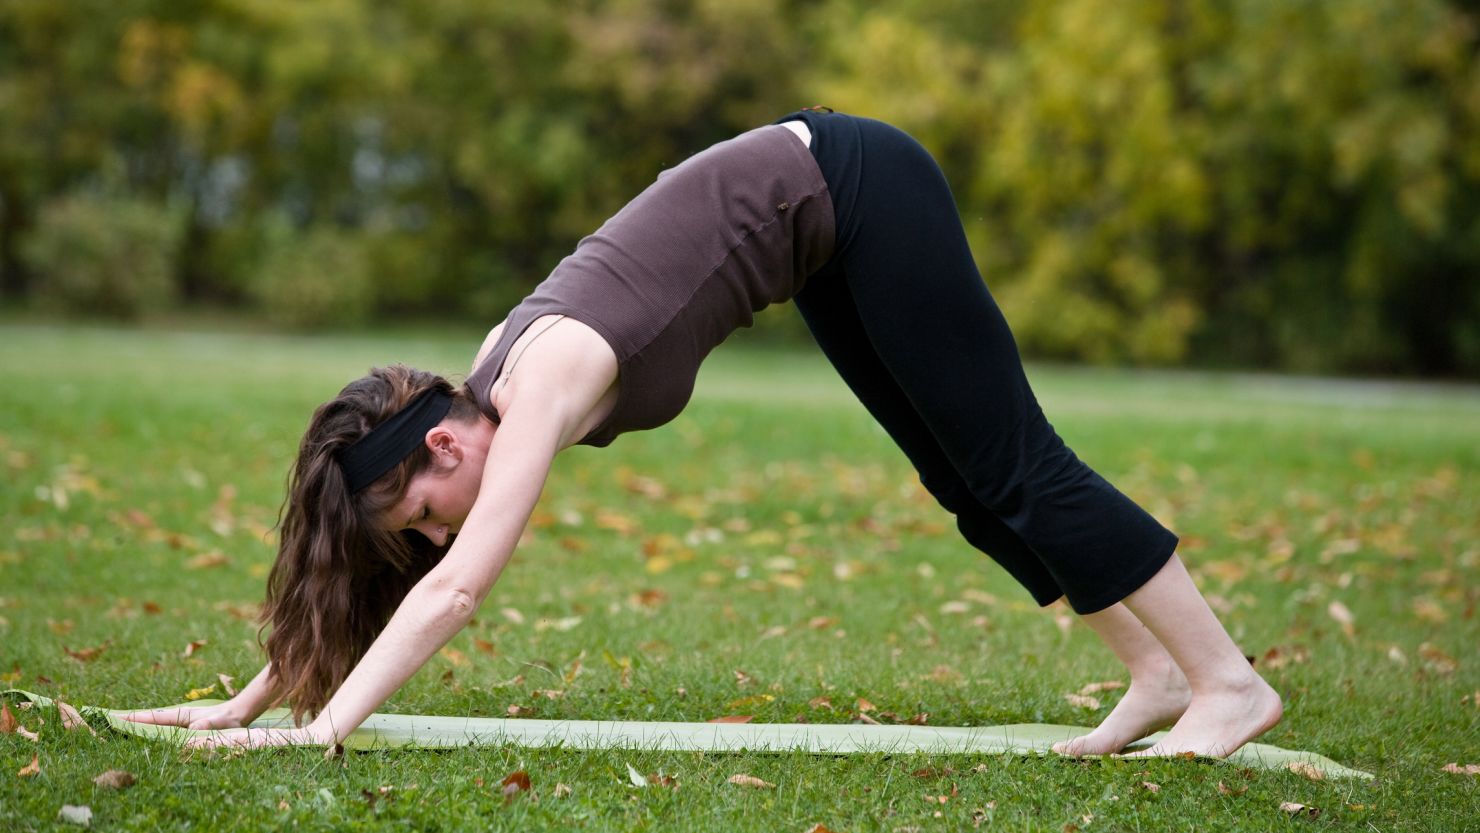 The downward dog and other yoga exercises can have a positive effect on psychological problems.